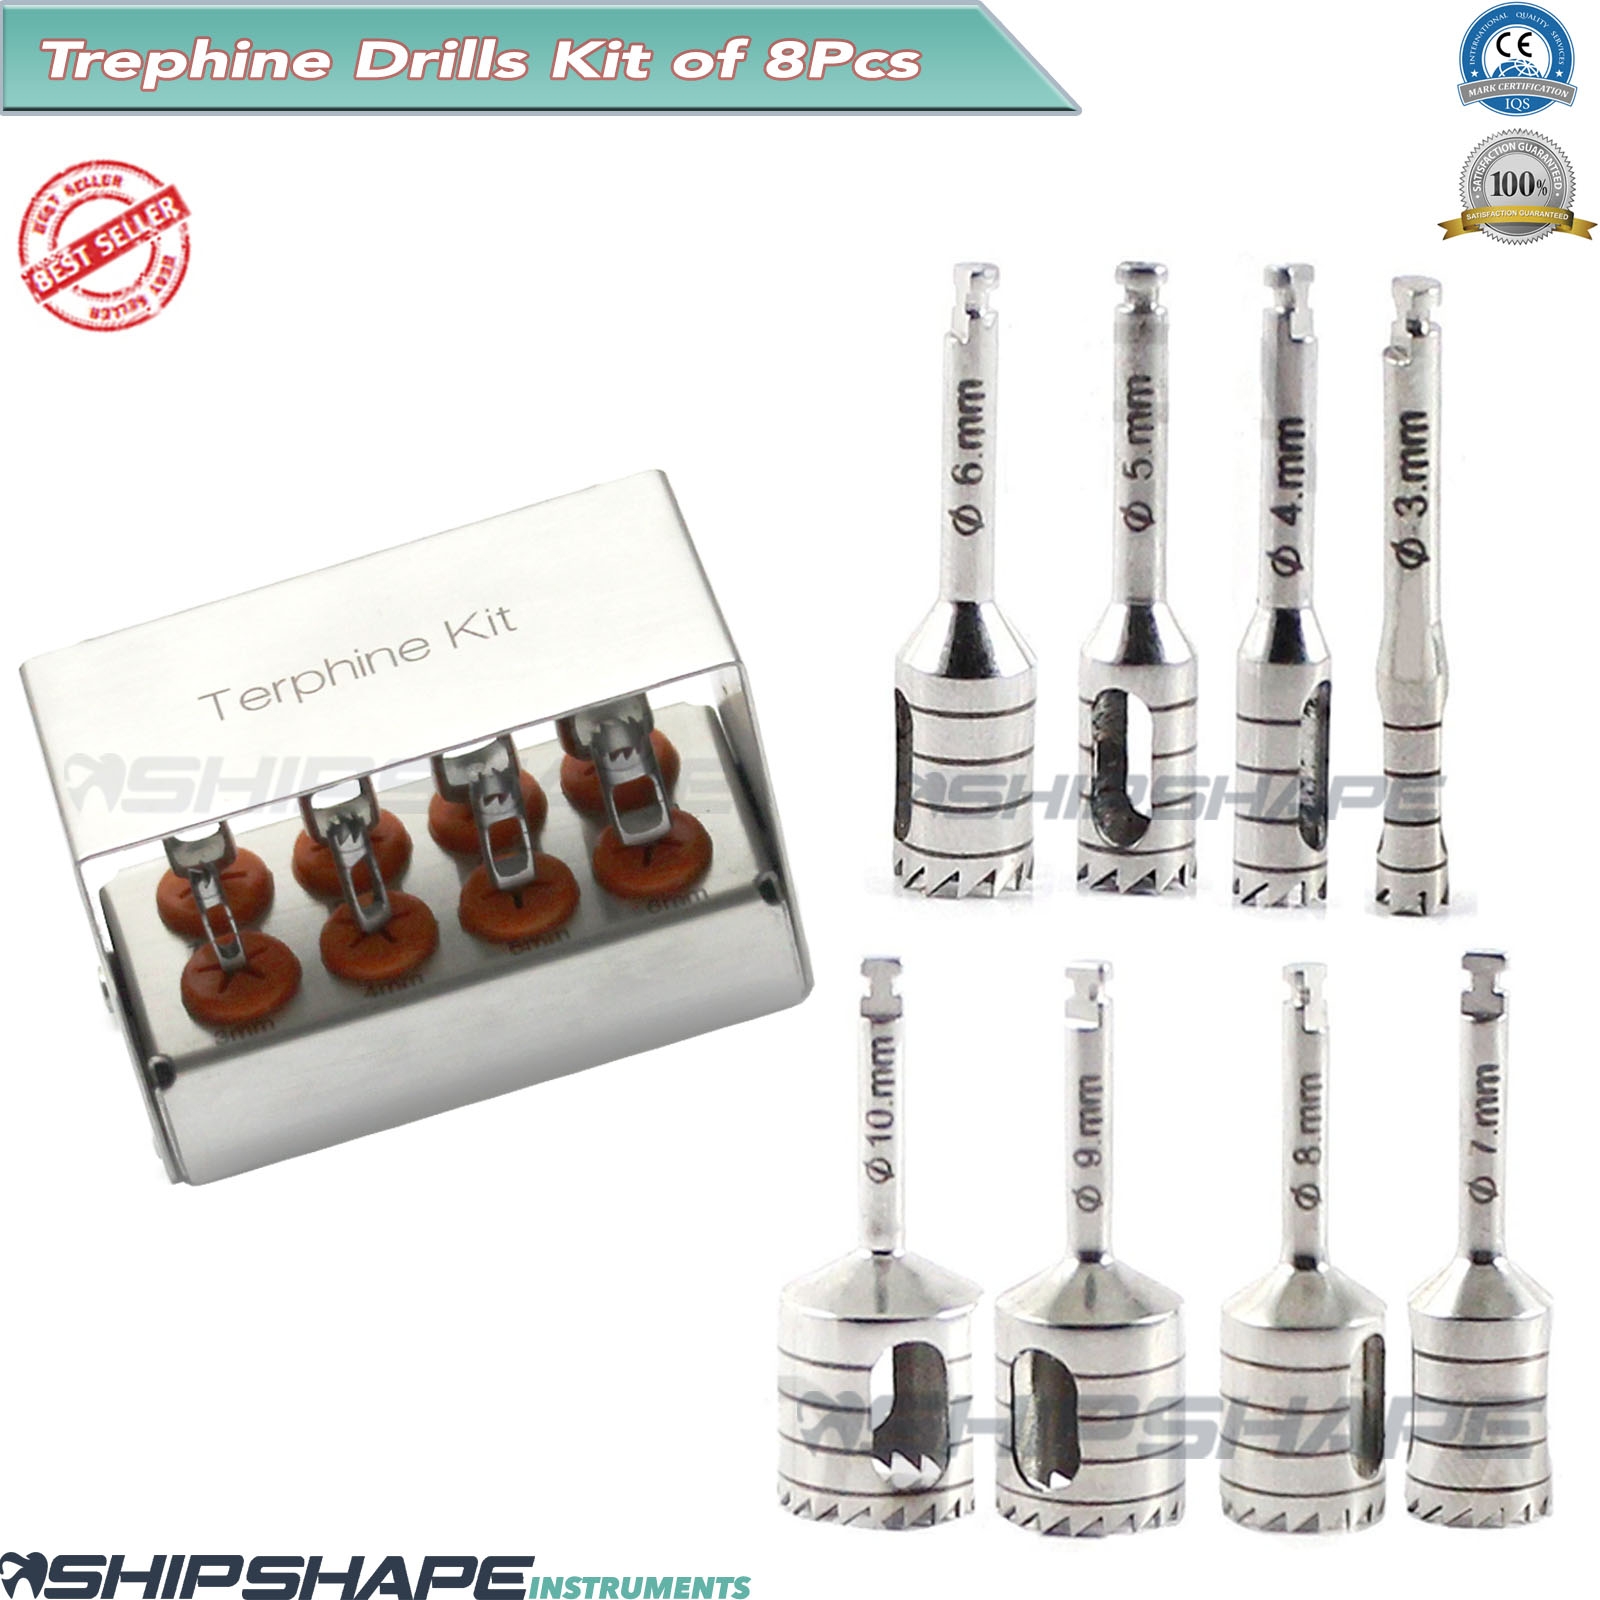 Dental Terphine Drill Punch Kit Dentist Implant Tissue Punch Drills Surgical Instruments-1661